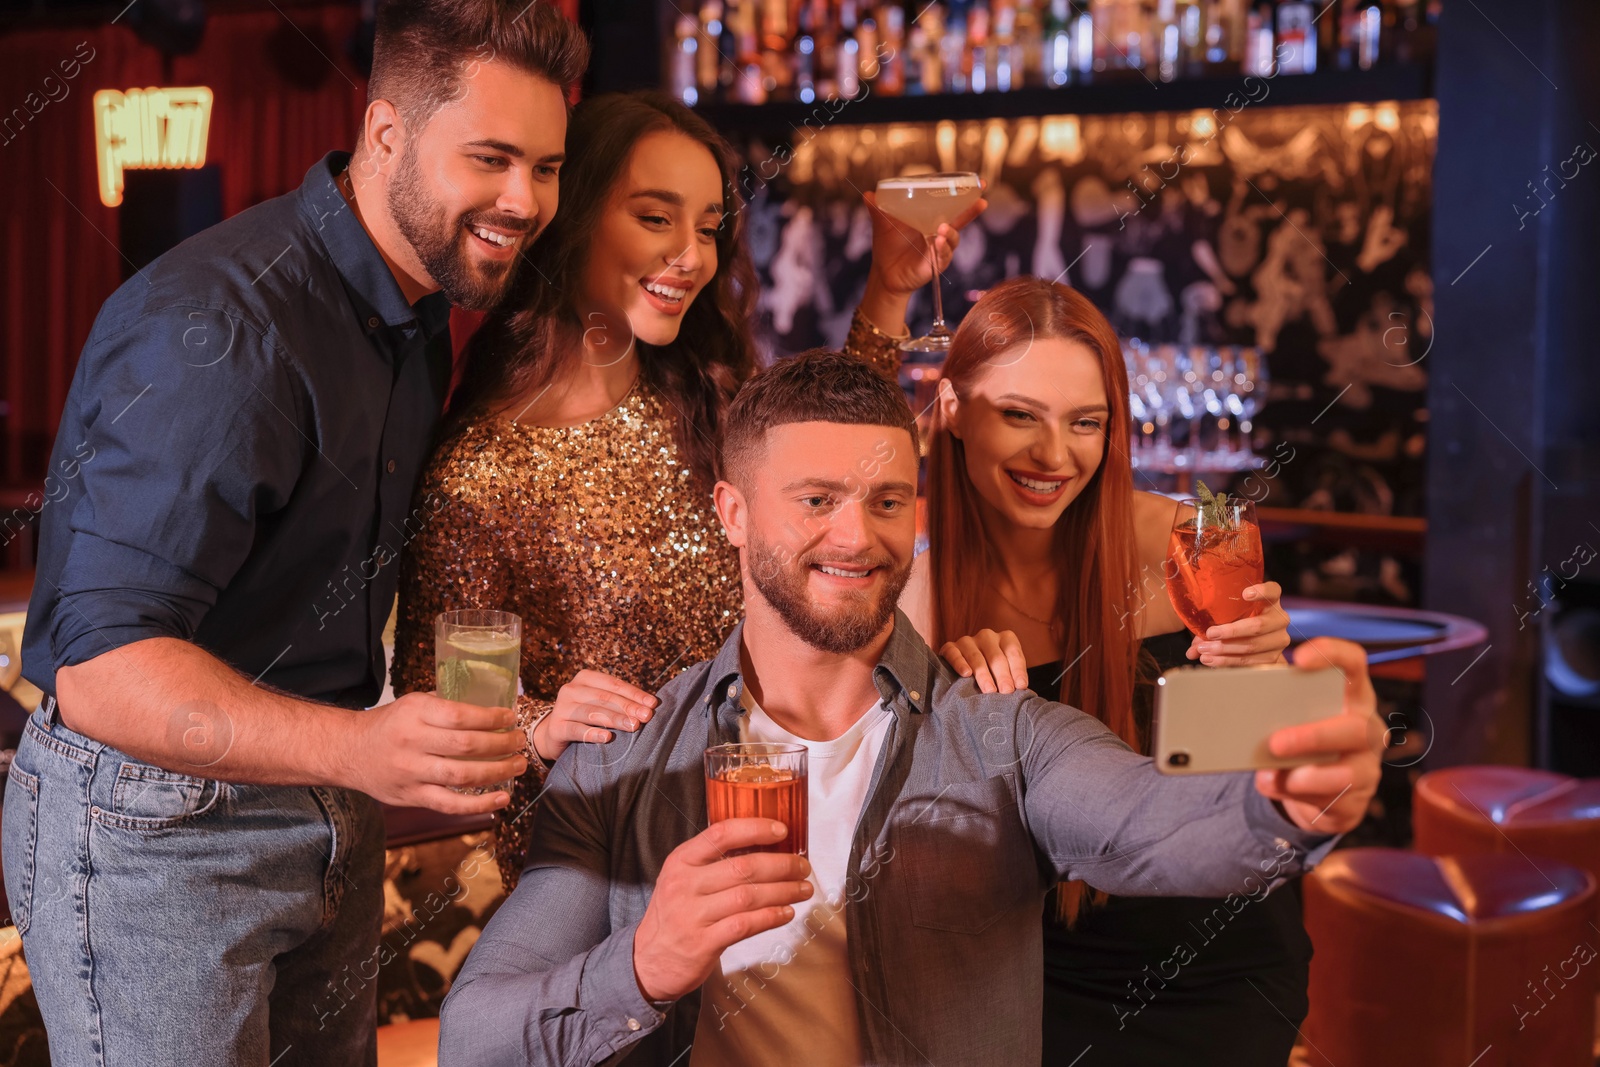 Photo of Happy friends with cocktails taking selfie together in bar